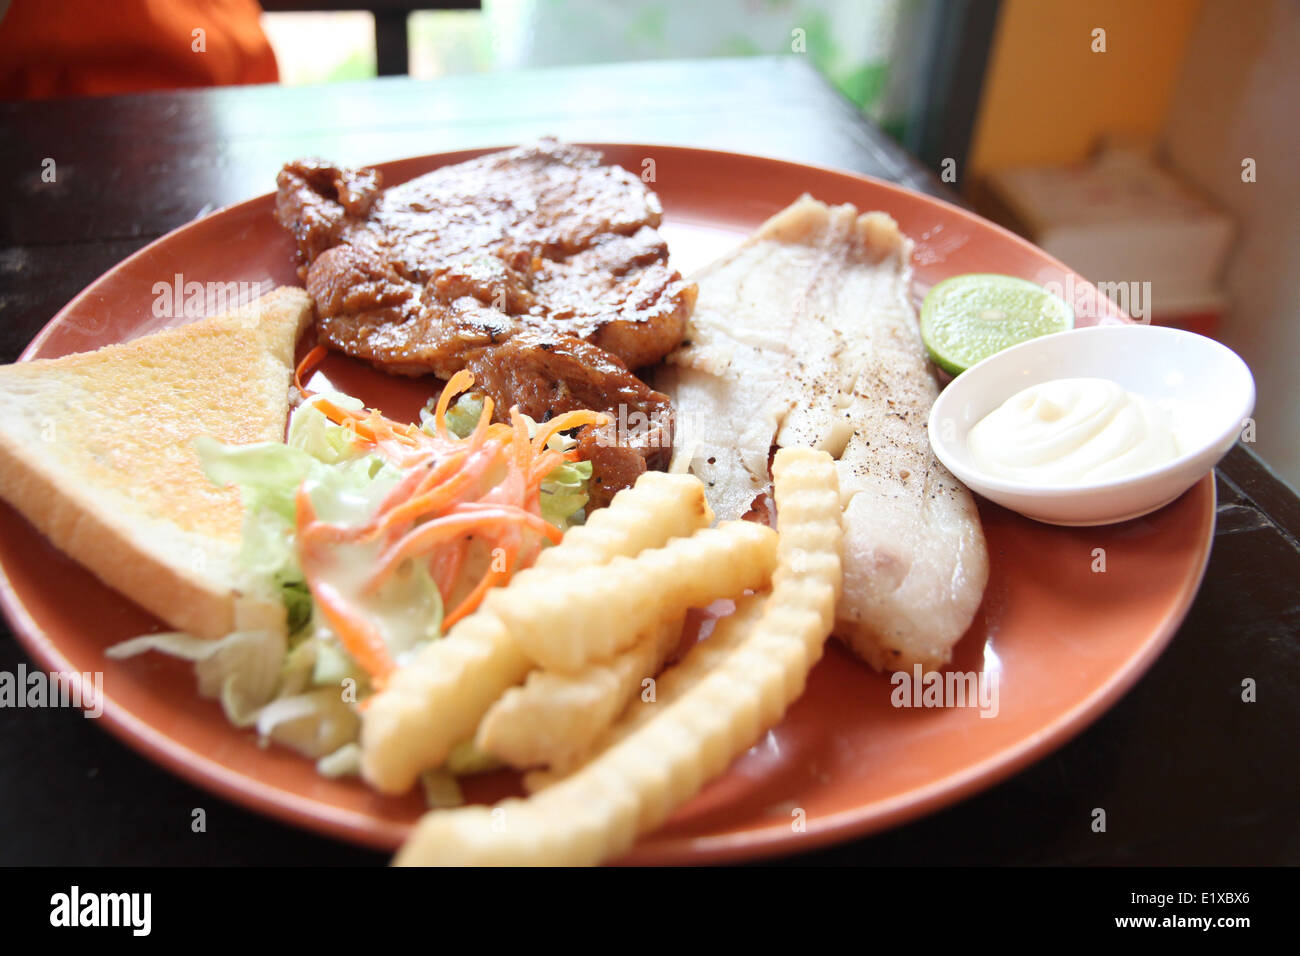 grilled pork steak with french fries and toast on the table in restaurant. Stock Photo